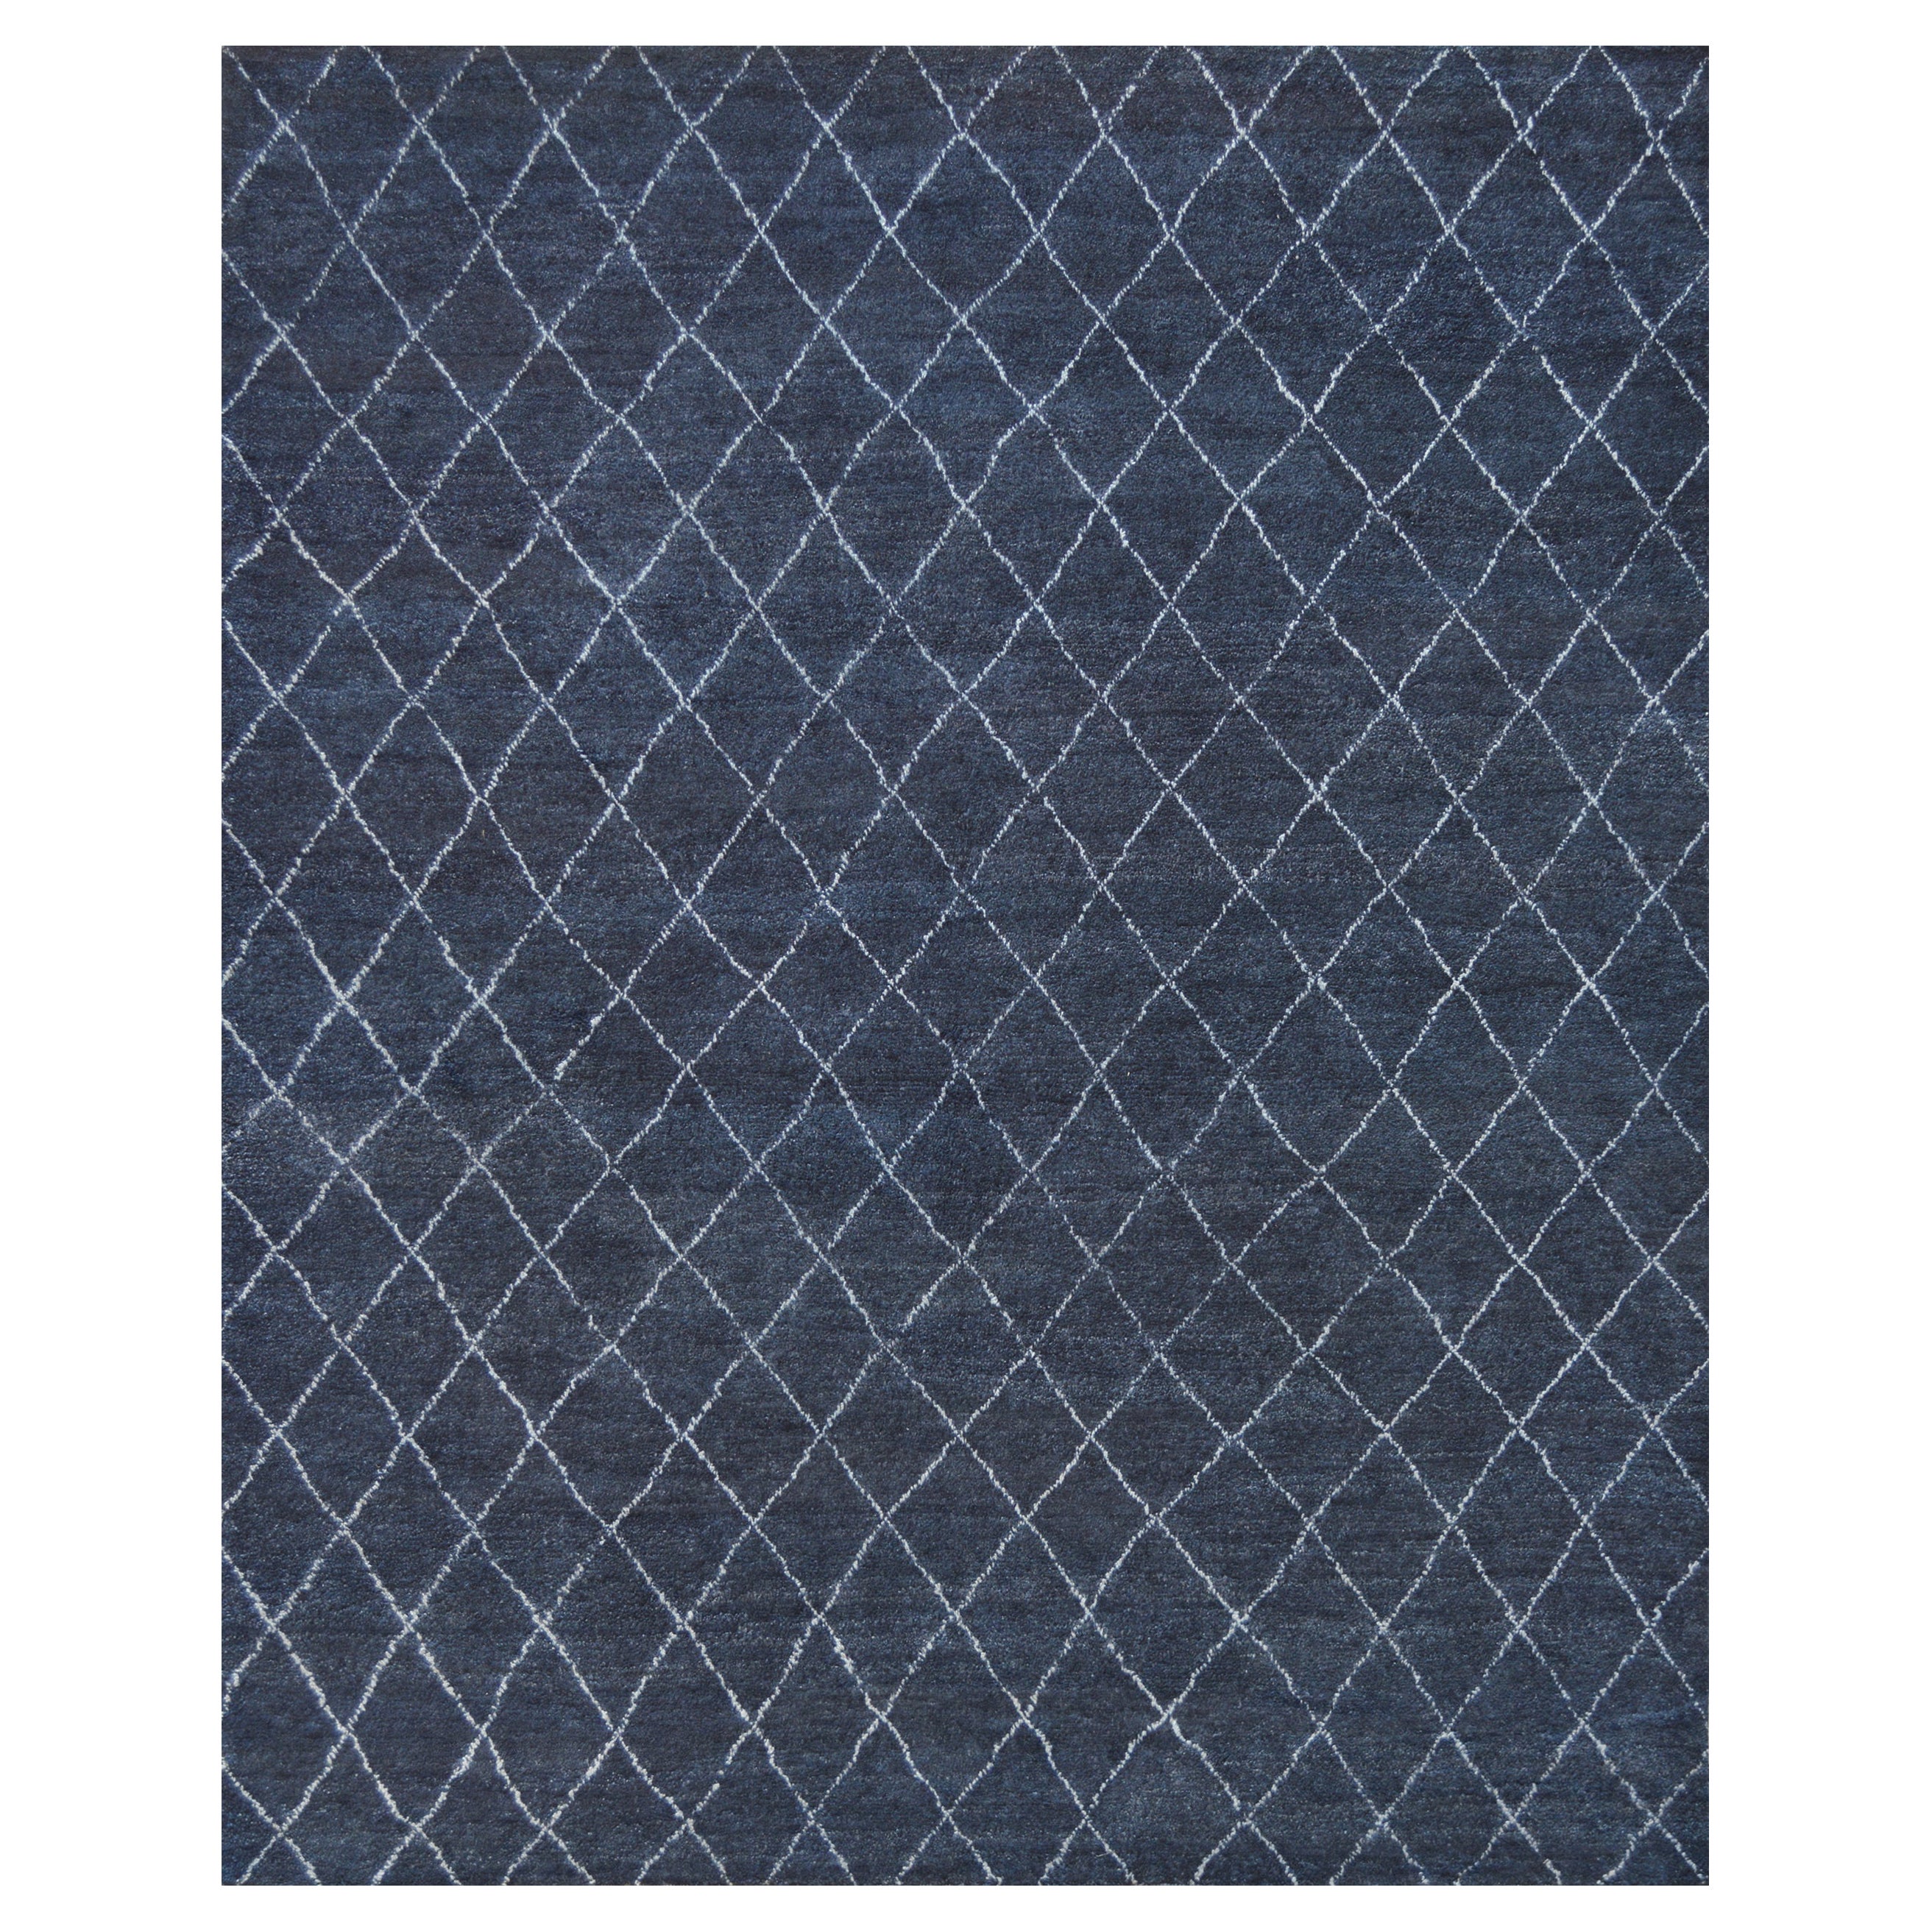 Contemporary Handwoven Moroccan Inspired Wool Rug